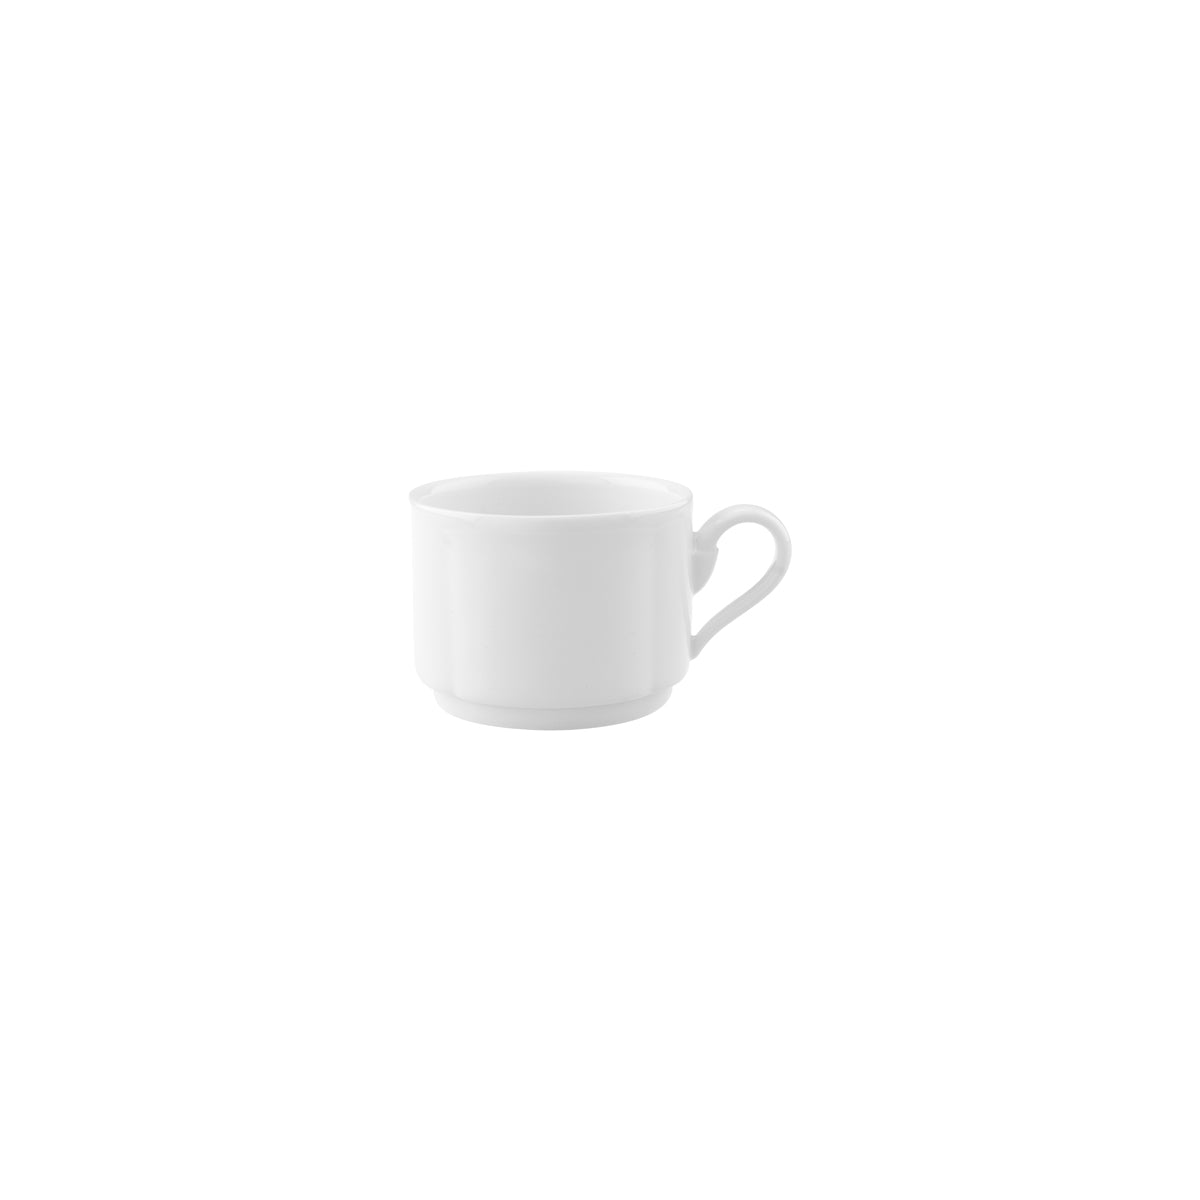 VB16-3318-1271 Villeroy And Boch Villeroy And Boch La Scala White Cup No. 2 Stackable 220ml Tomkin Australia Hospitality Supplies